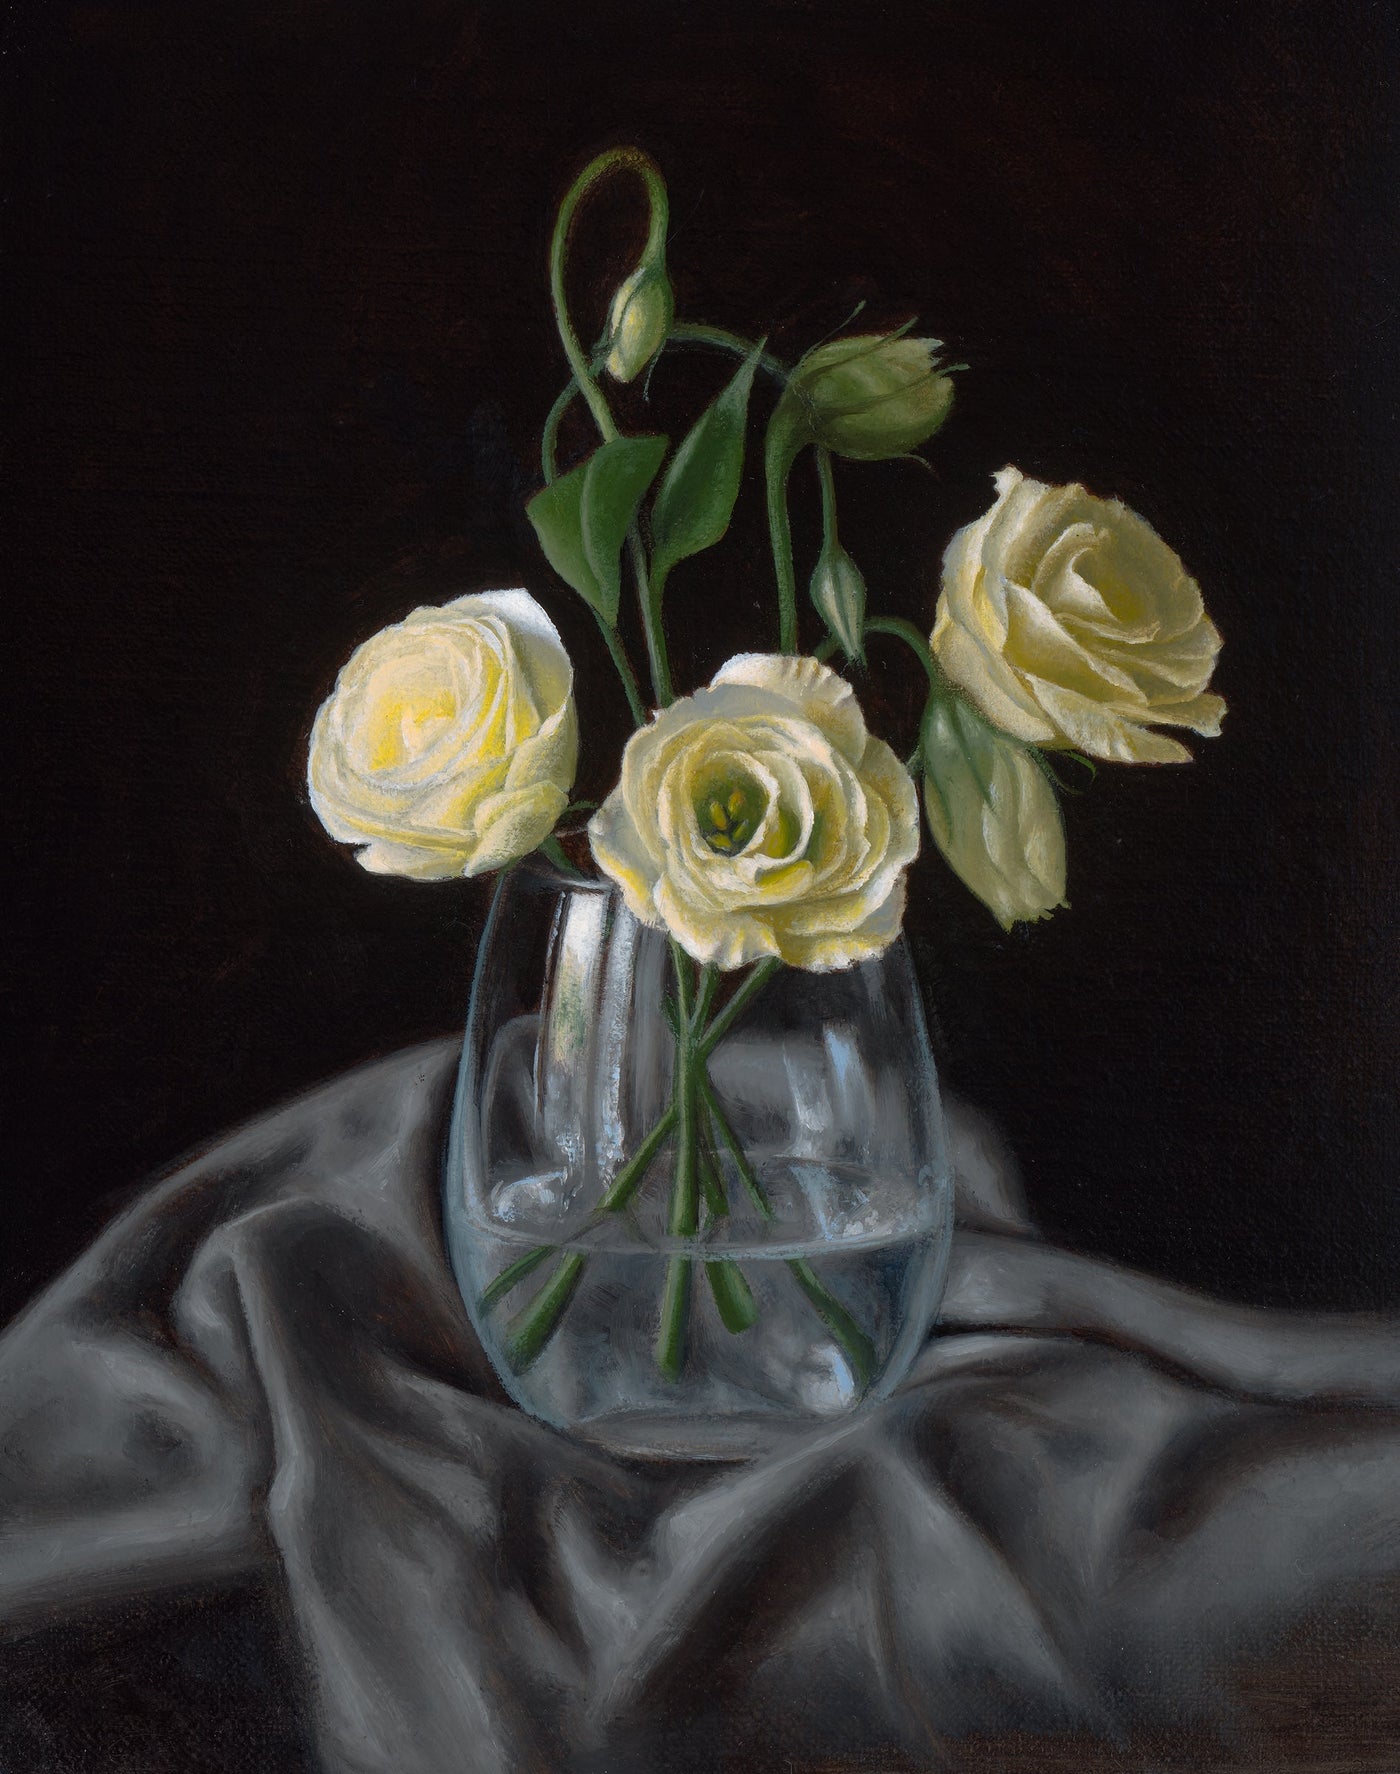 Marnie White - Roses in Glass